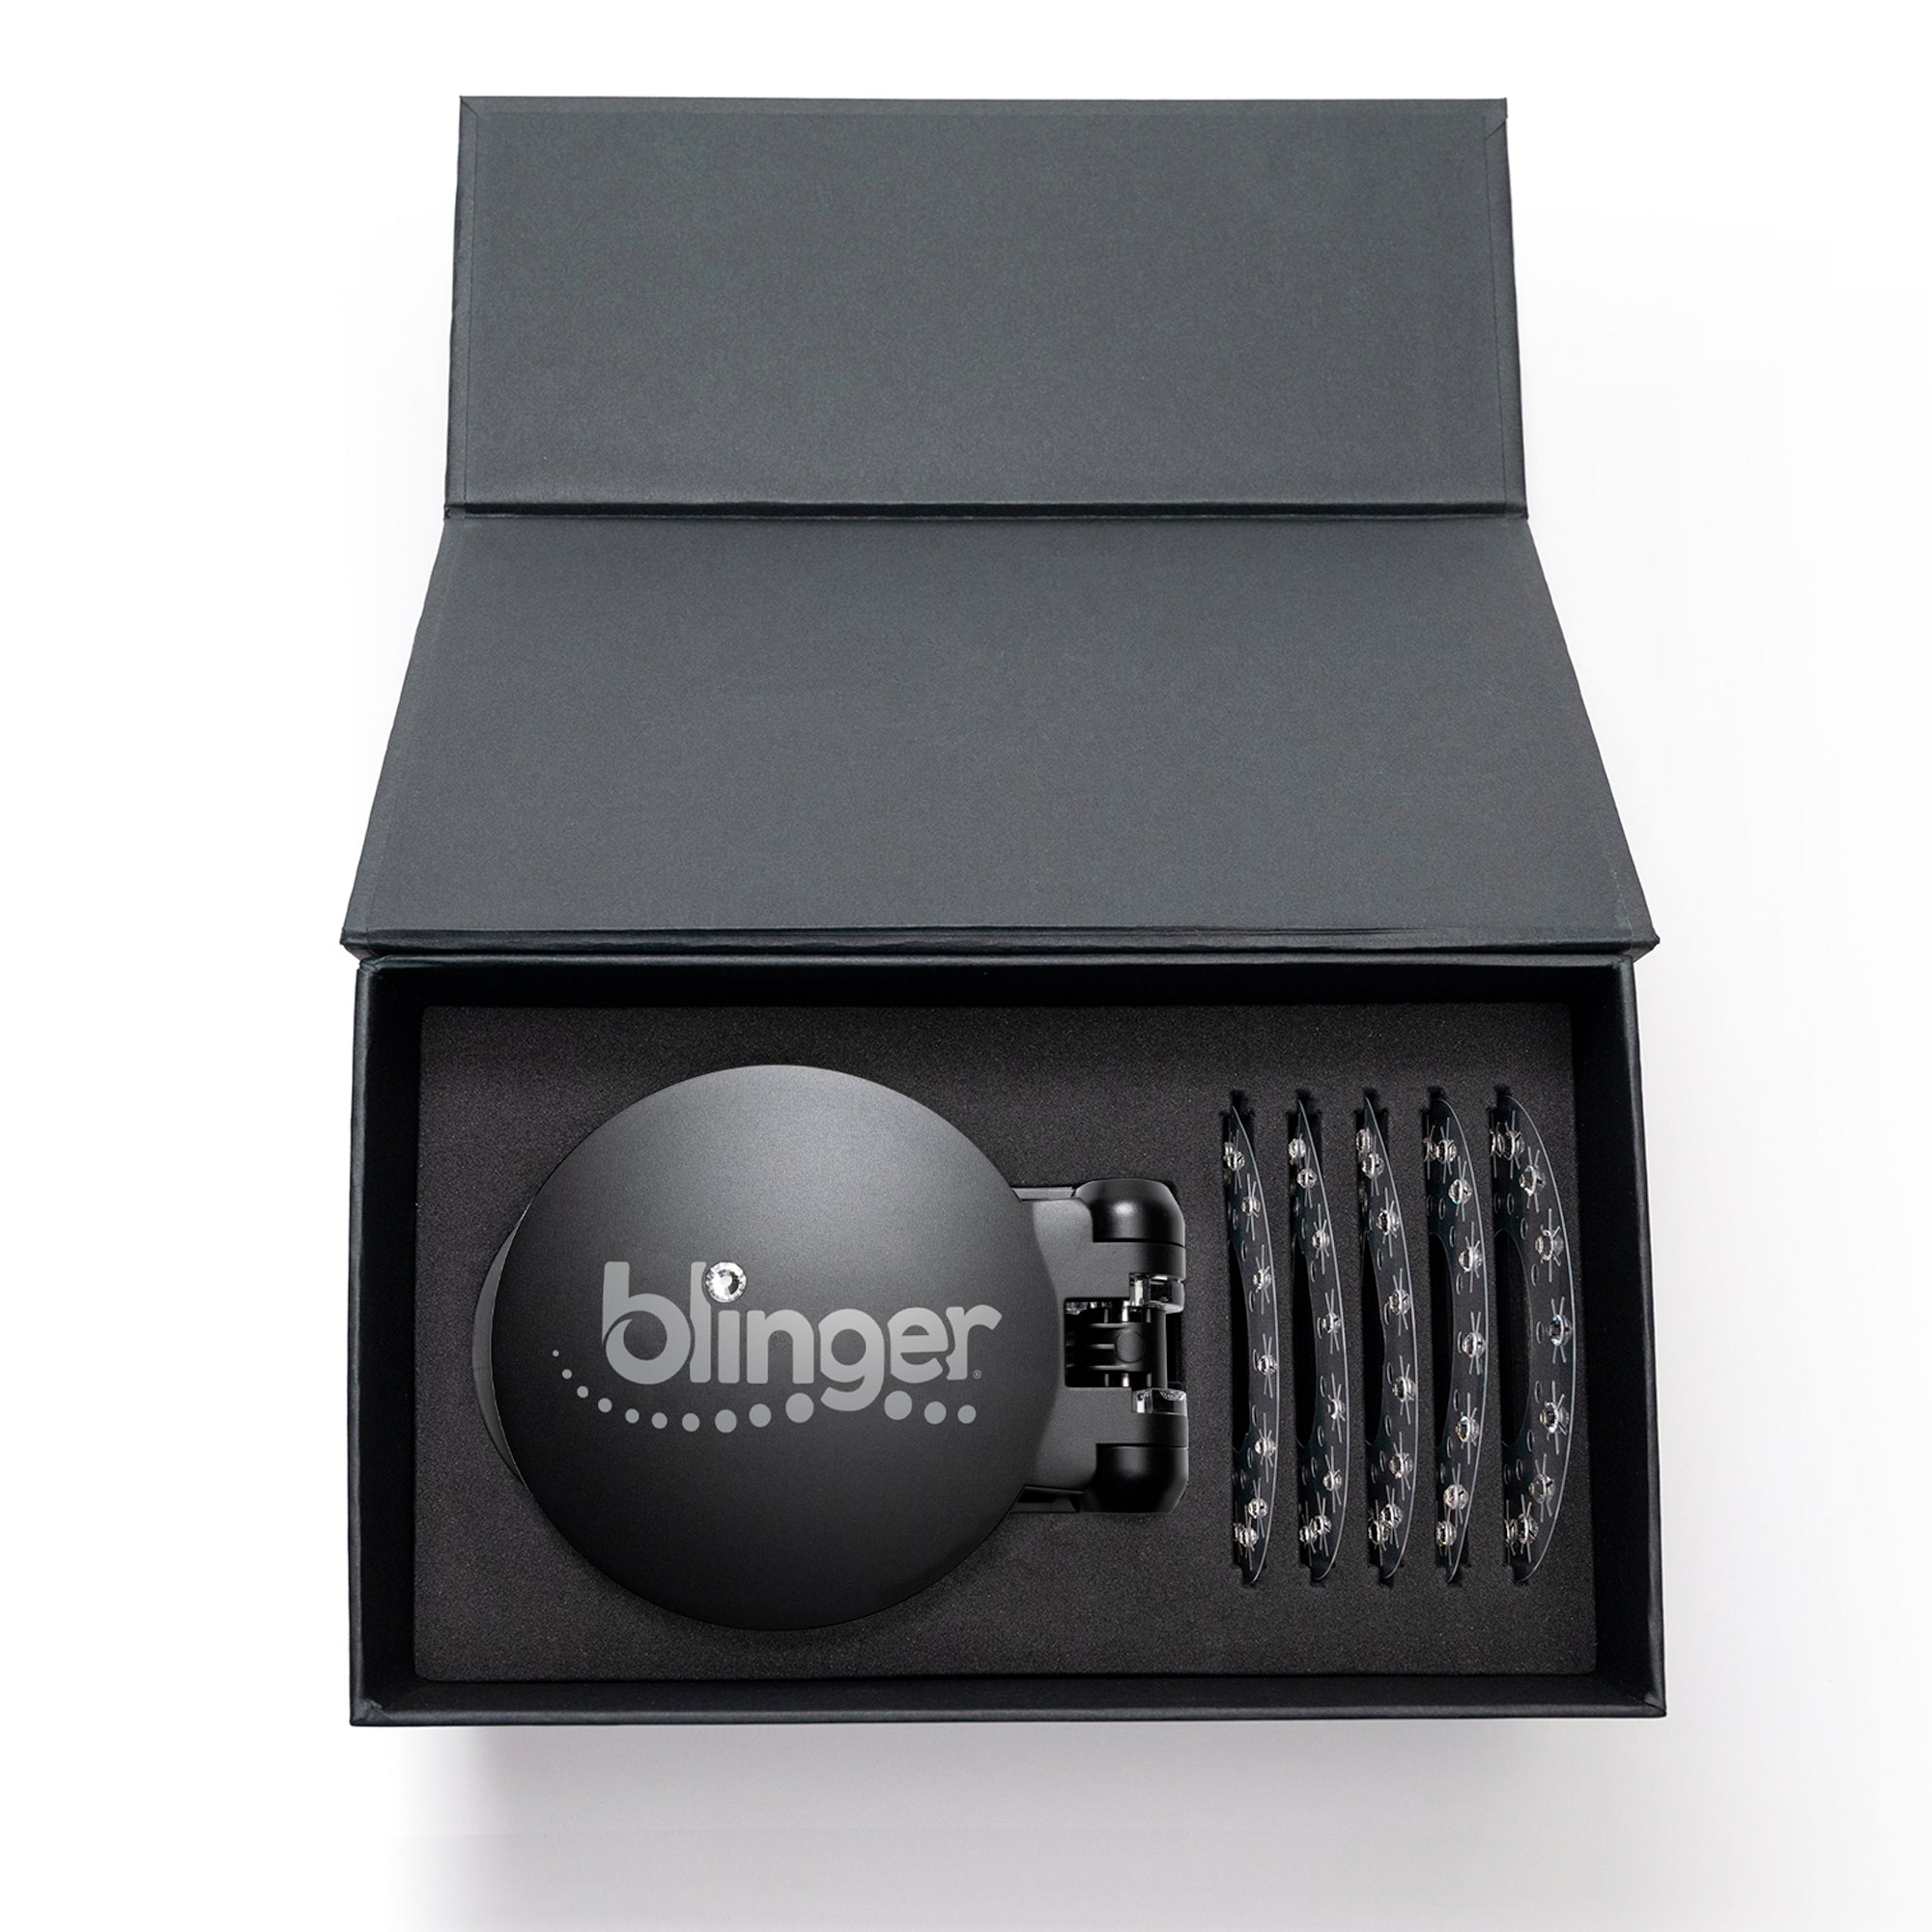 Blinger™ Diamond Collection Glam Styling Tool - White, 1 ct - Fred